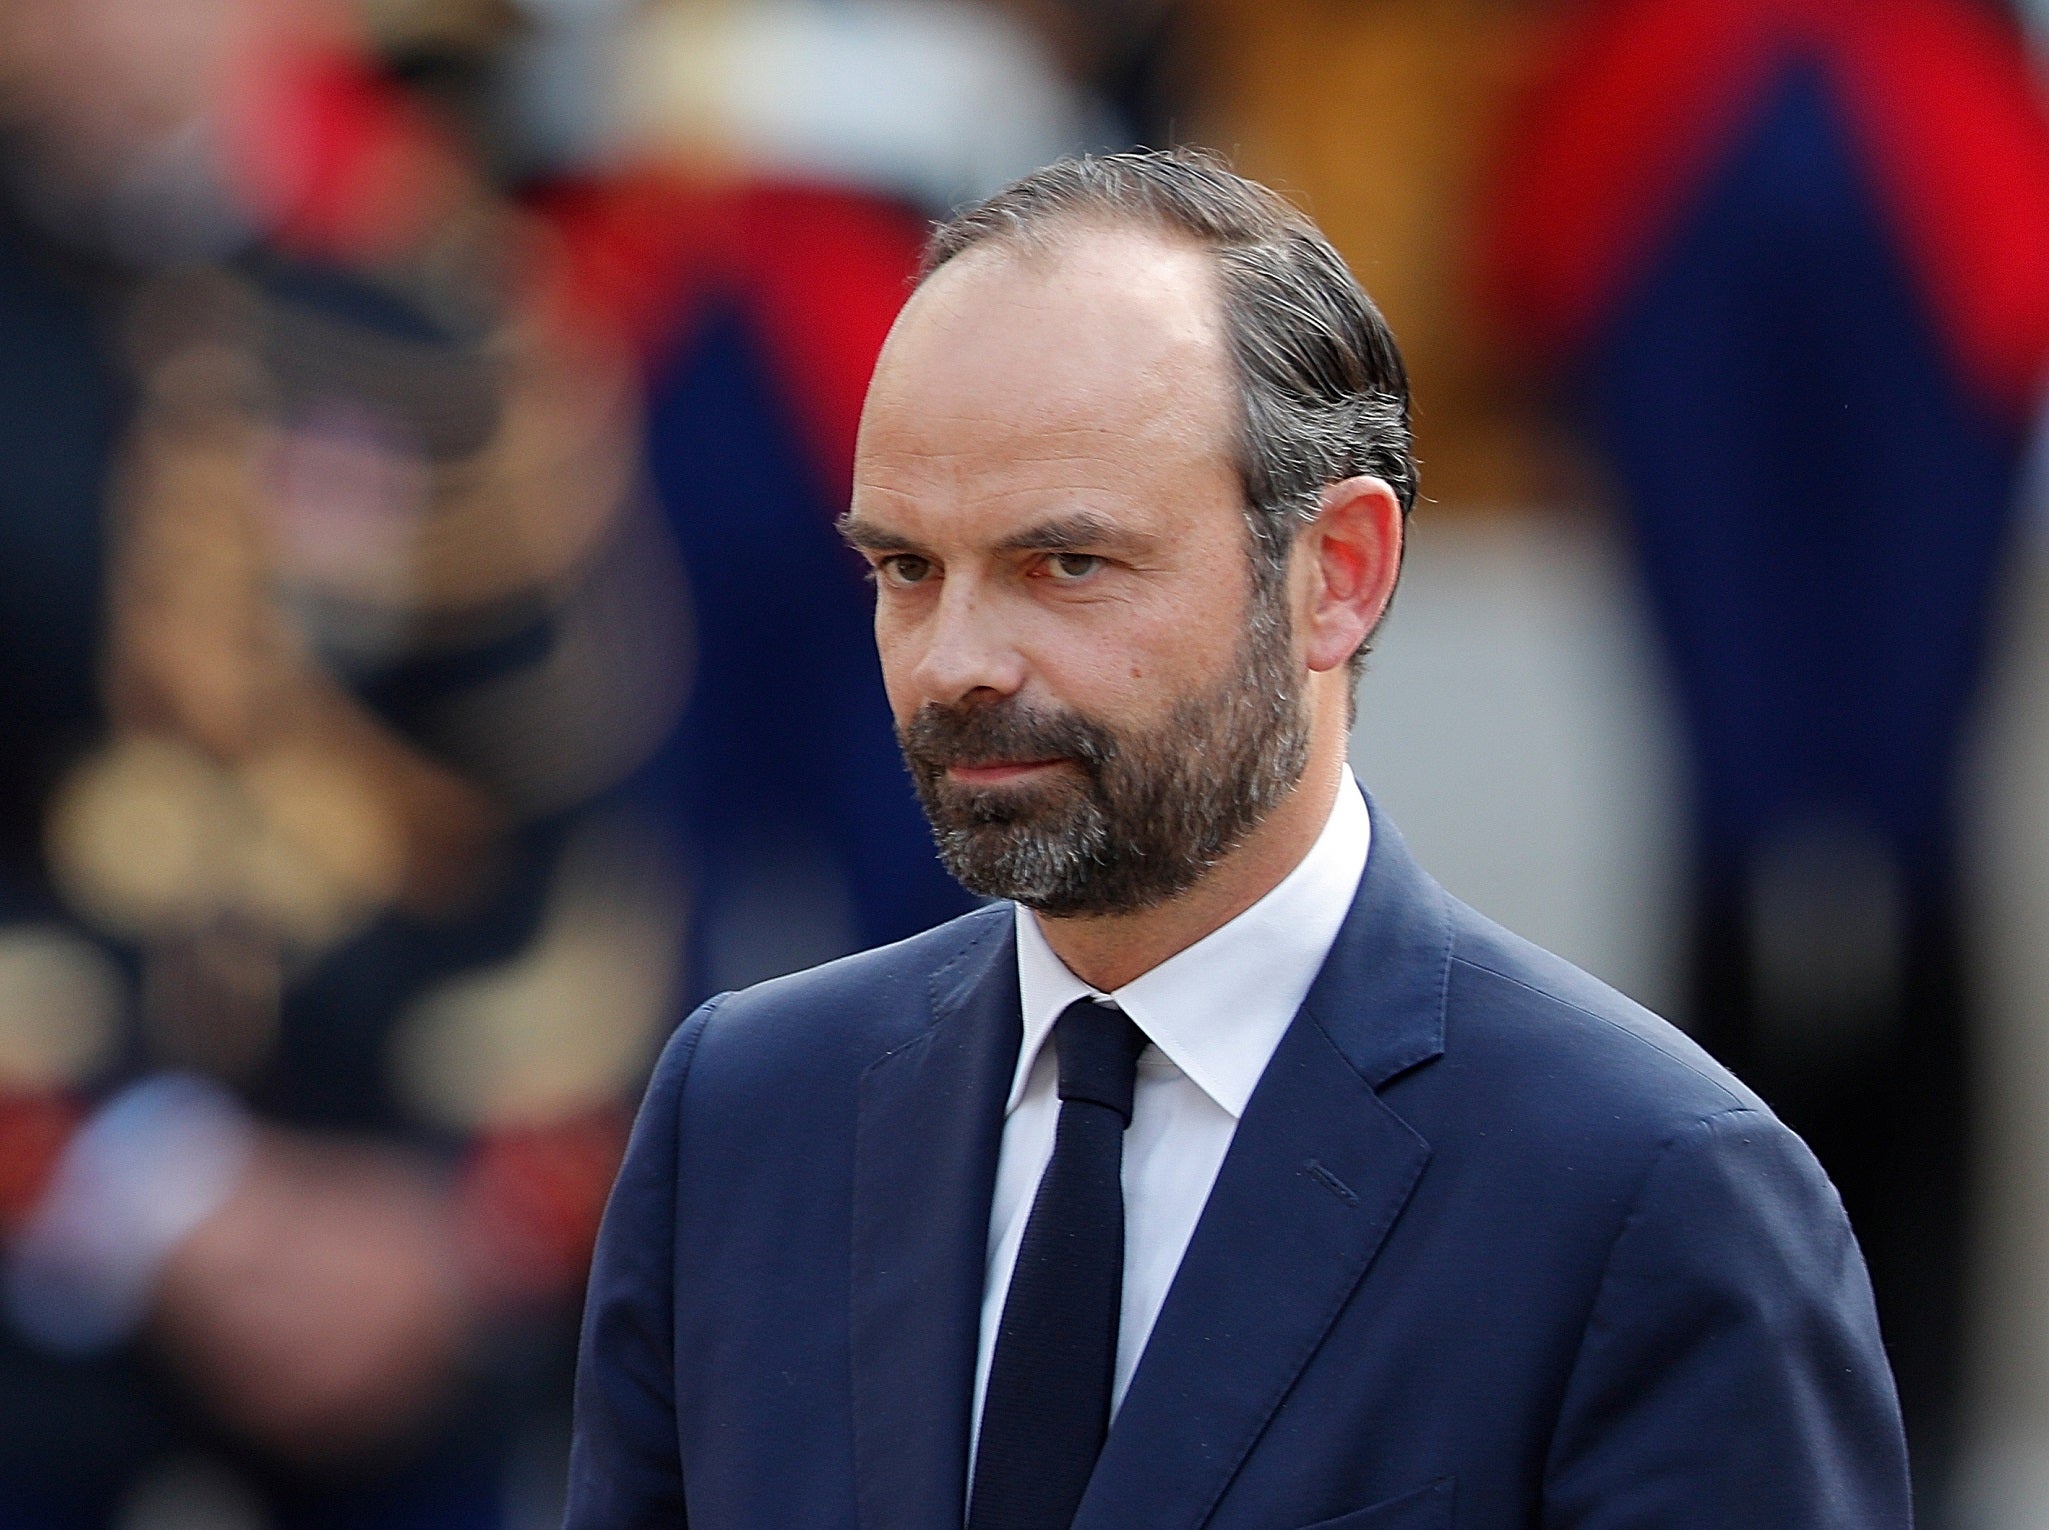 Newly-appointed French Prime Minister Edouard Philippe attends a handover ceremony at the Hotel Matignon in Paris